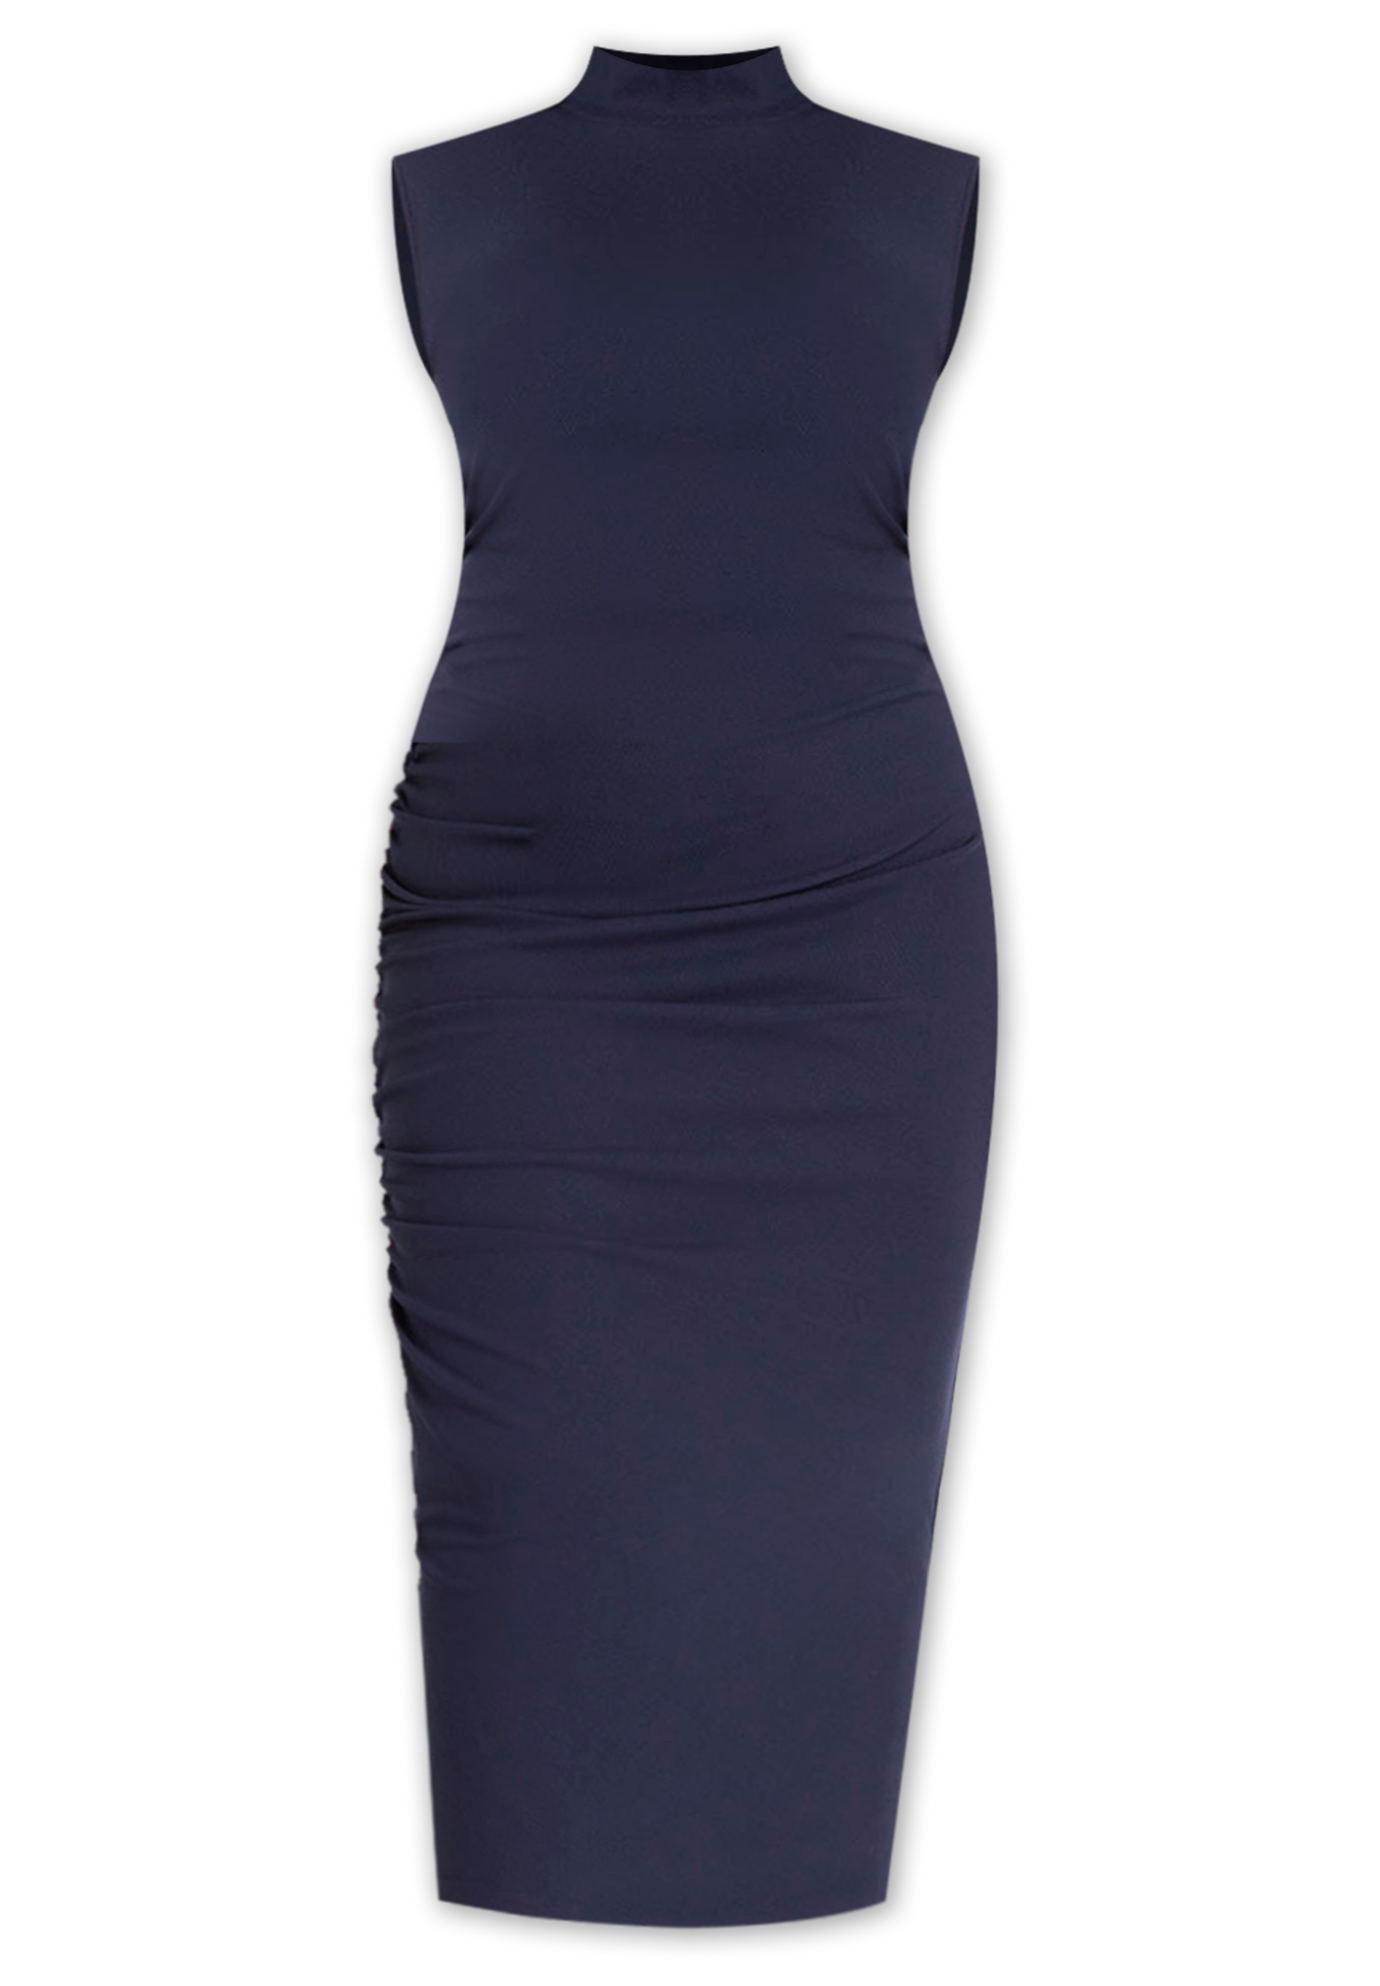 Follow the Curve Black Ruched Off-the-Shoulder Bodycon Dress